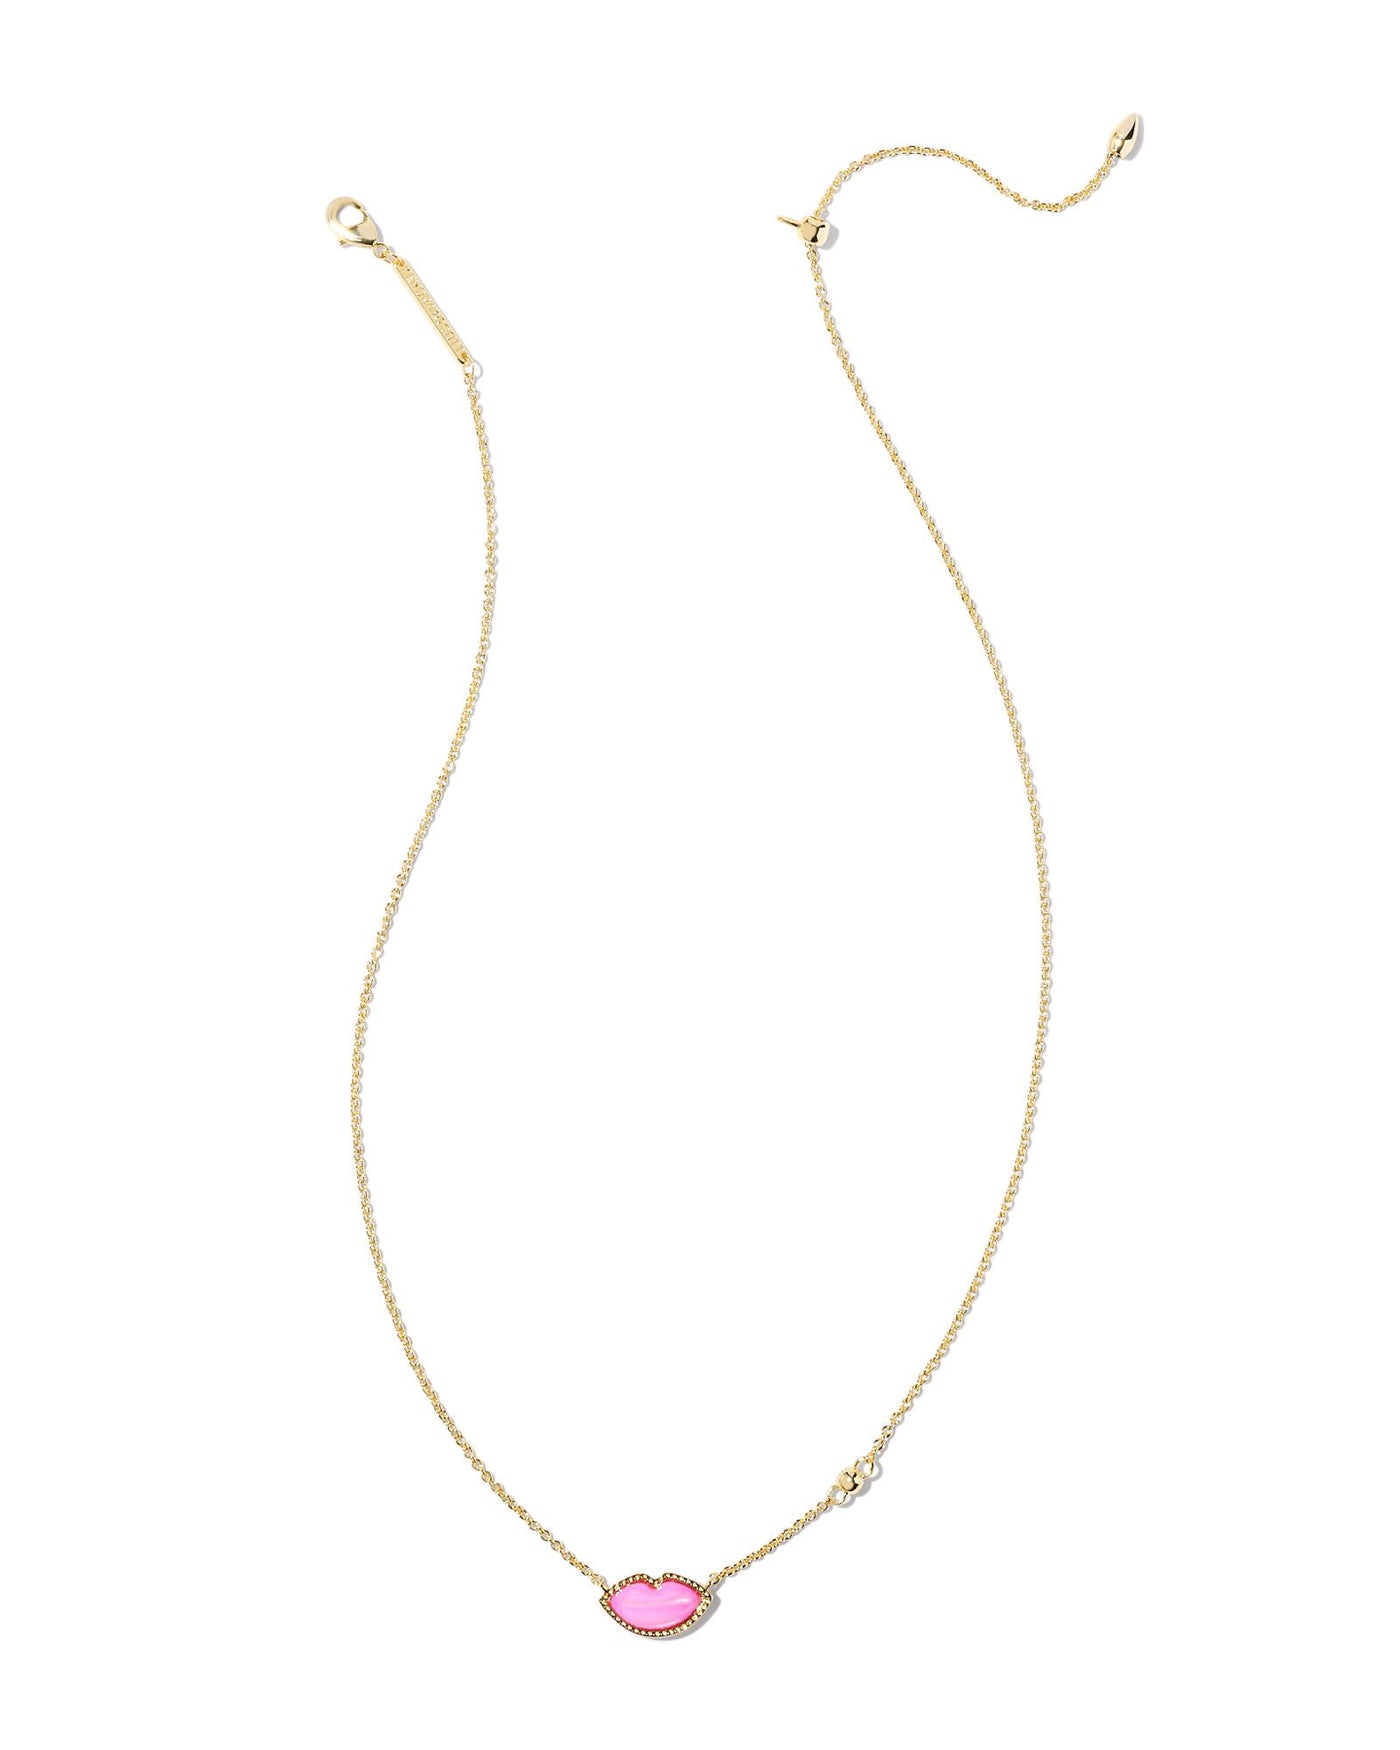 Kendra Scott Lips Pendant Necklace in Gold Pink Mother of Pearl full view.